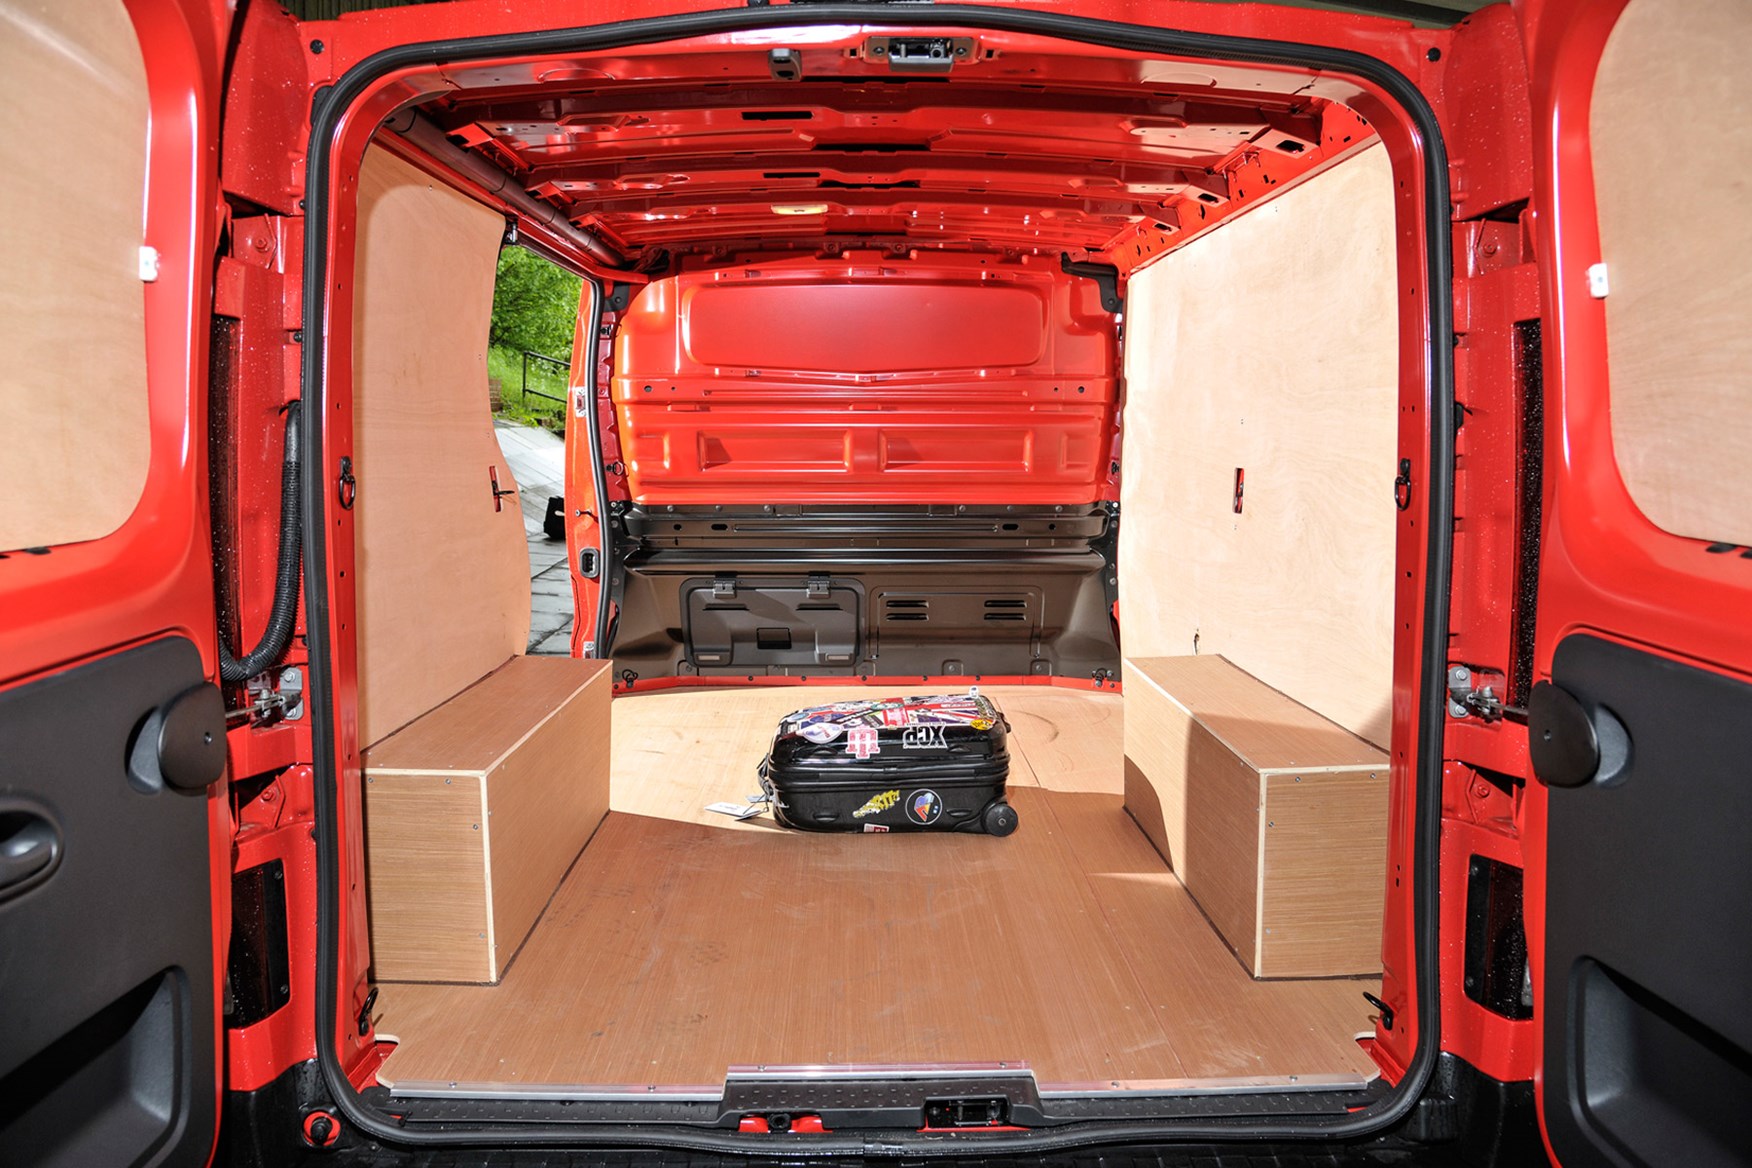 Nissan NV300 full review on Parkers Vans - load area dimensions